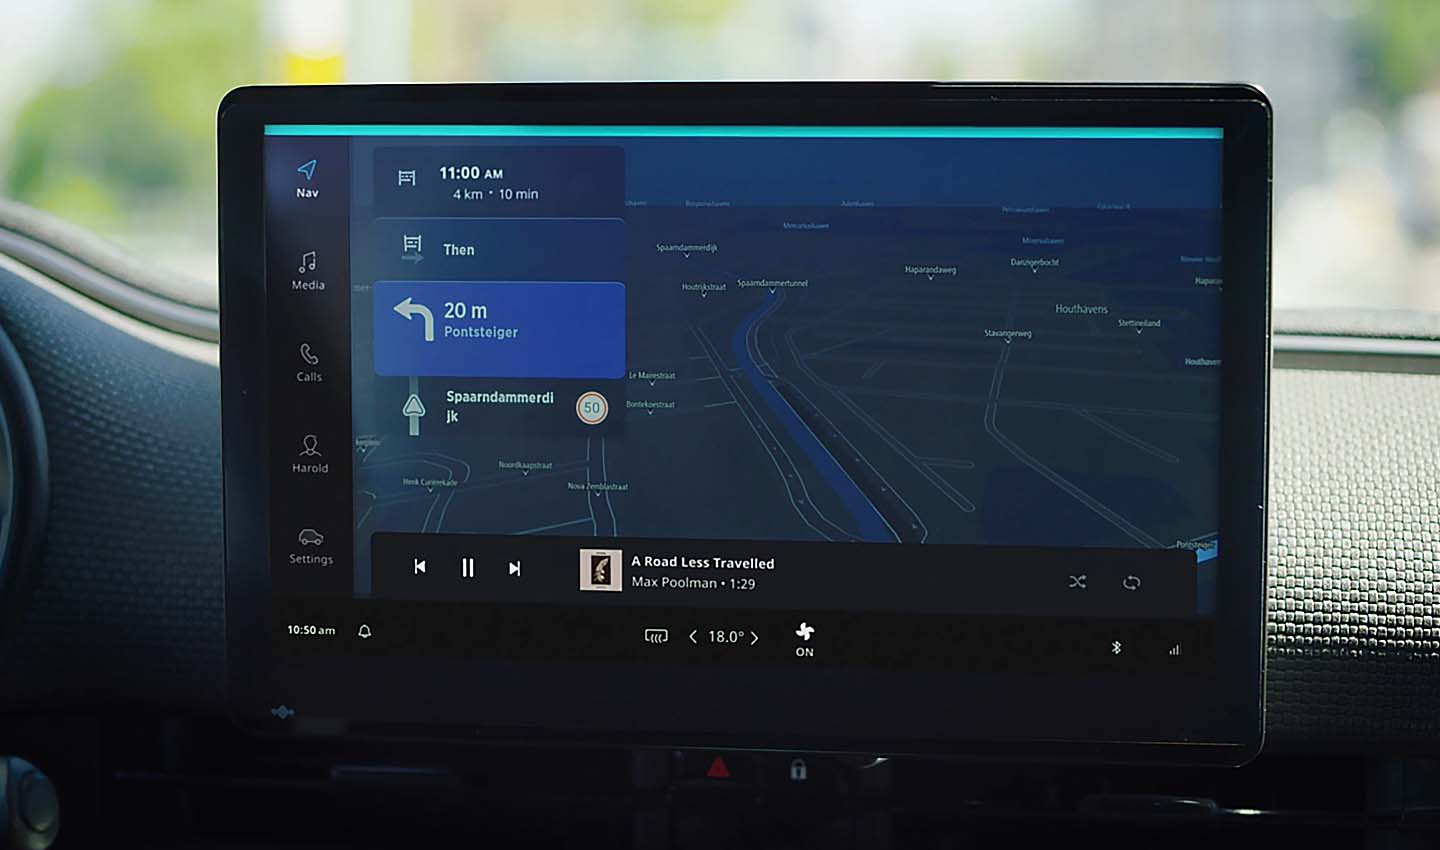 TomTom IndiGO will allow carmakers to easily and simply integrate entertainment apps as part of the in-vehicle experience. Music can be played with a simple Alexa command.